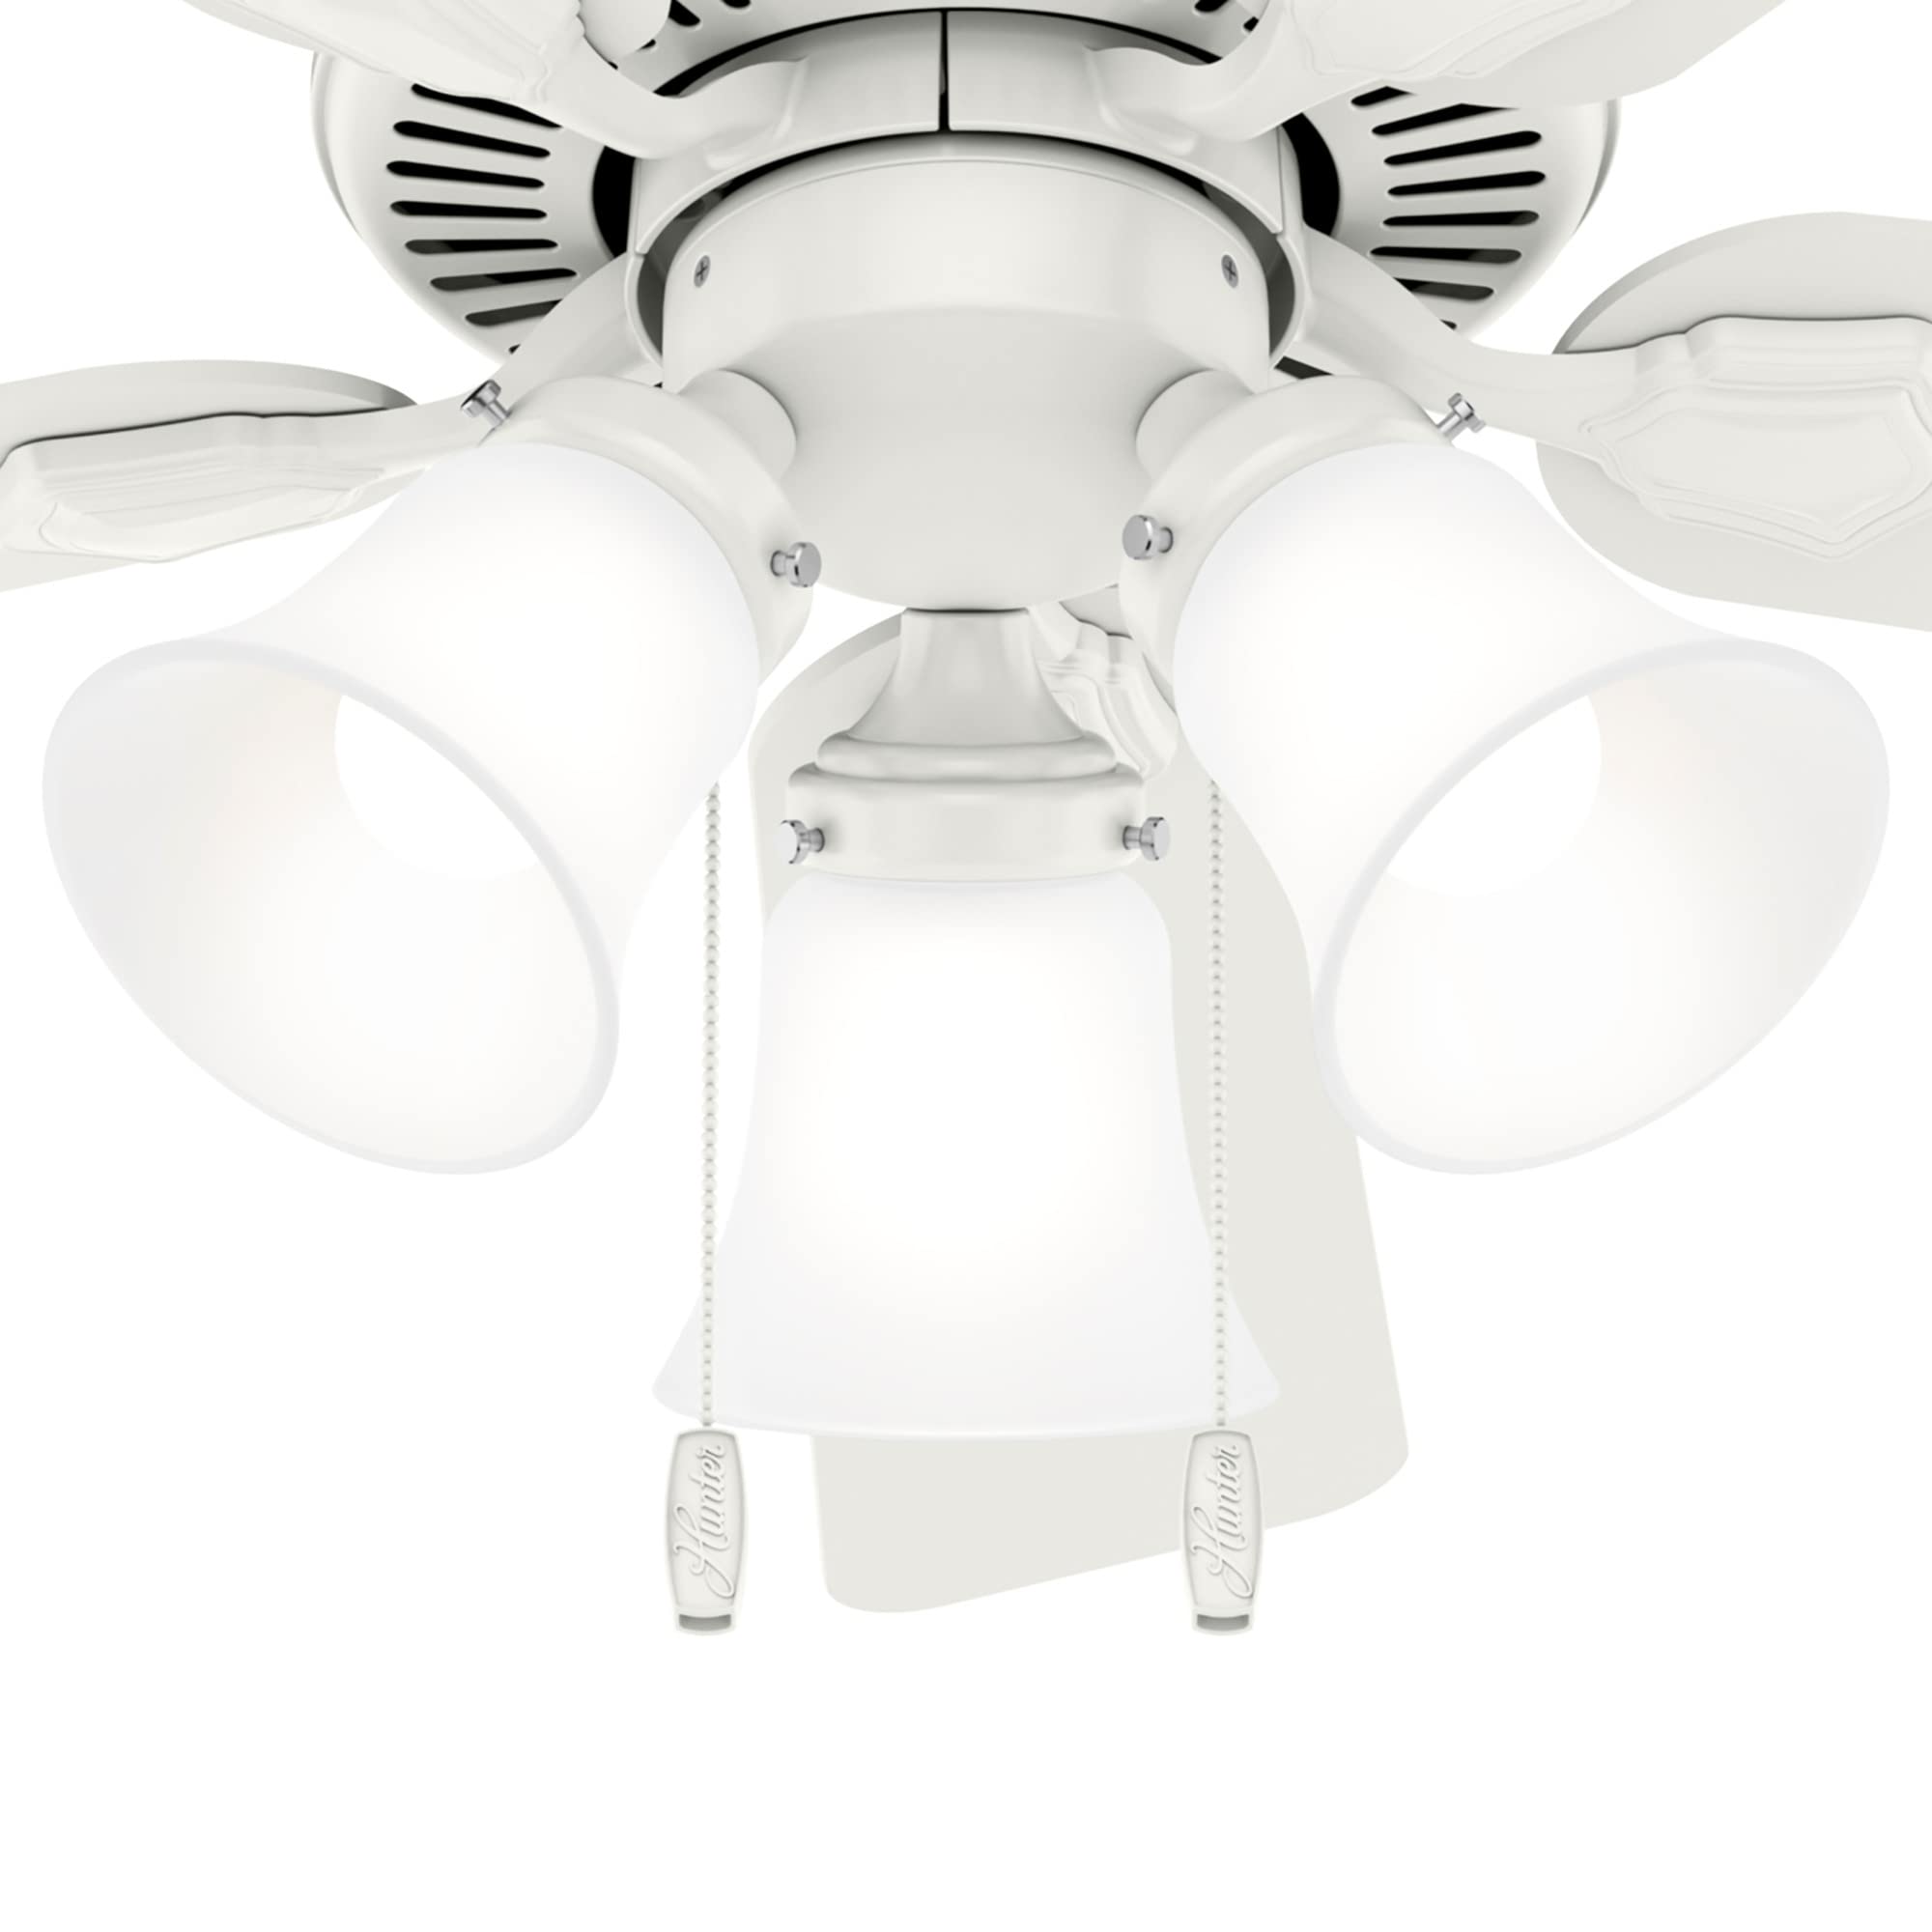 Hunter Swanson Indoor Ceiling Fan with LED Lights and Pull Chain Control, 44